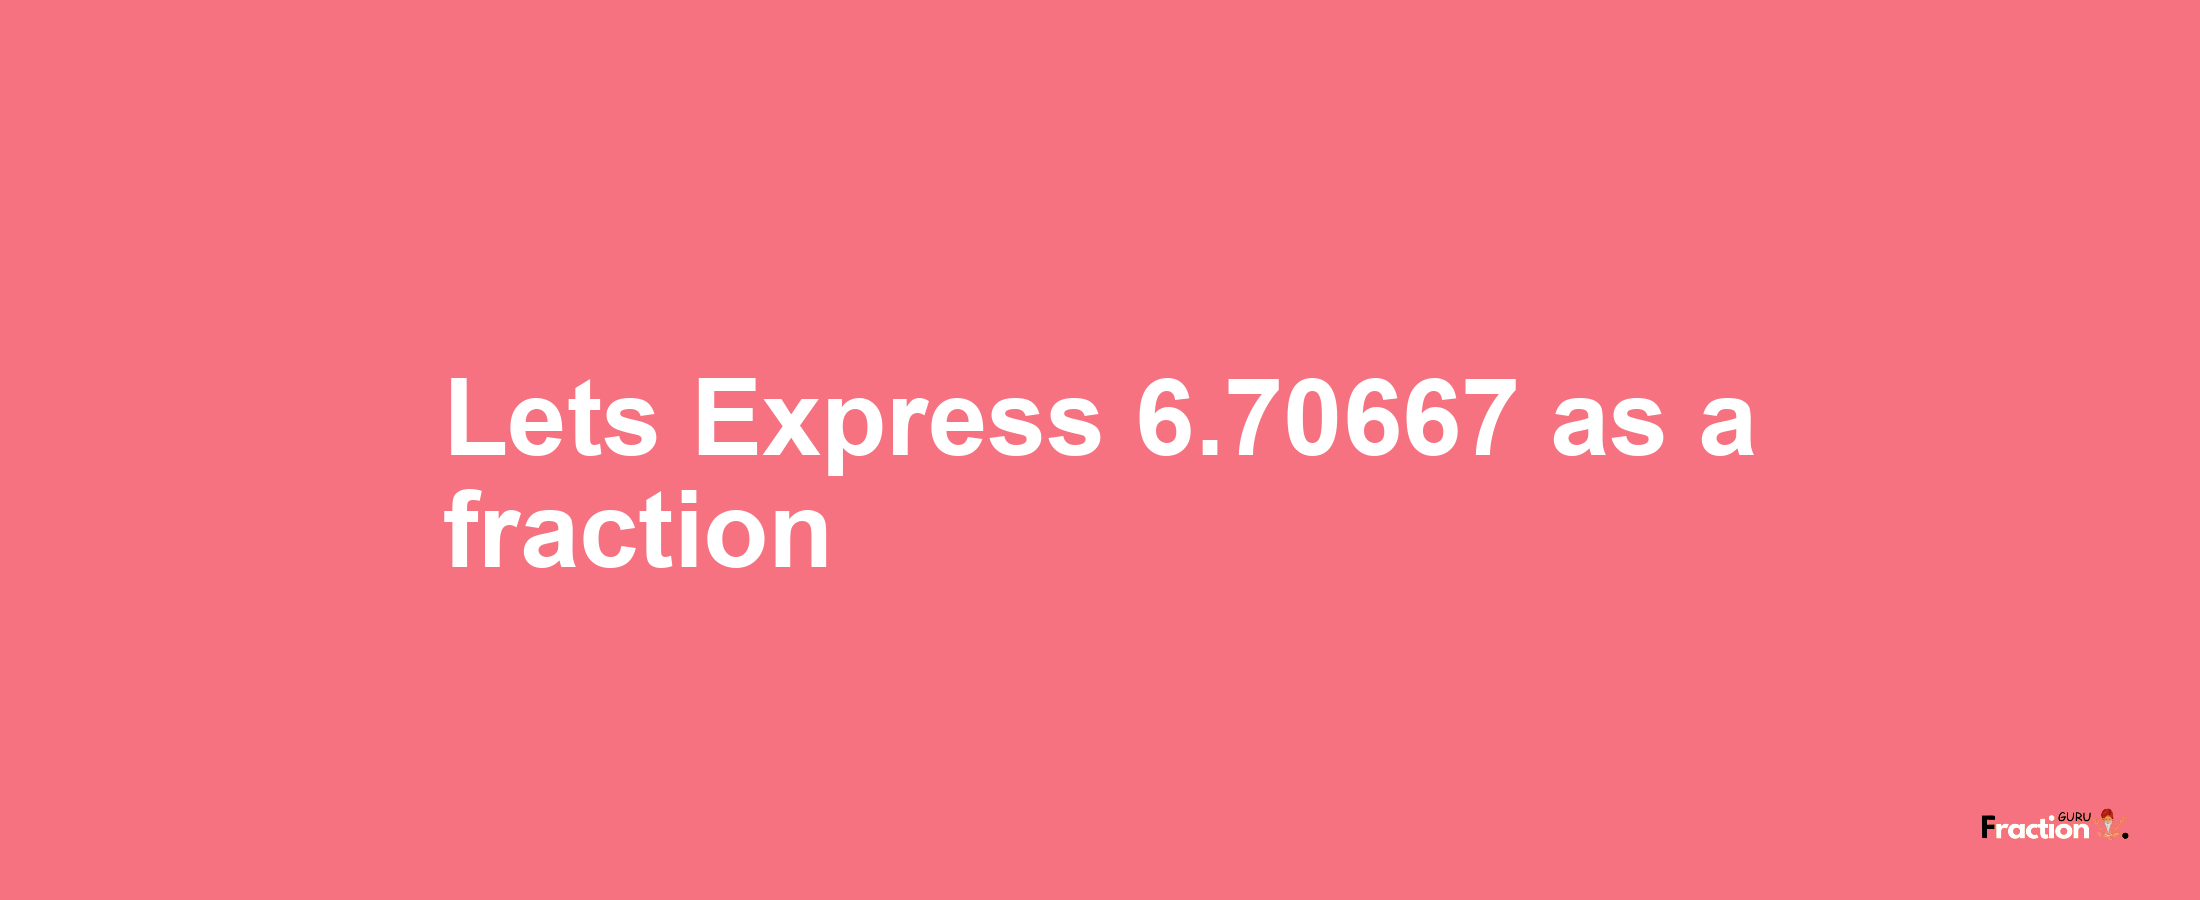 Lets Express 6.70667 as afraction